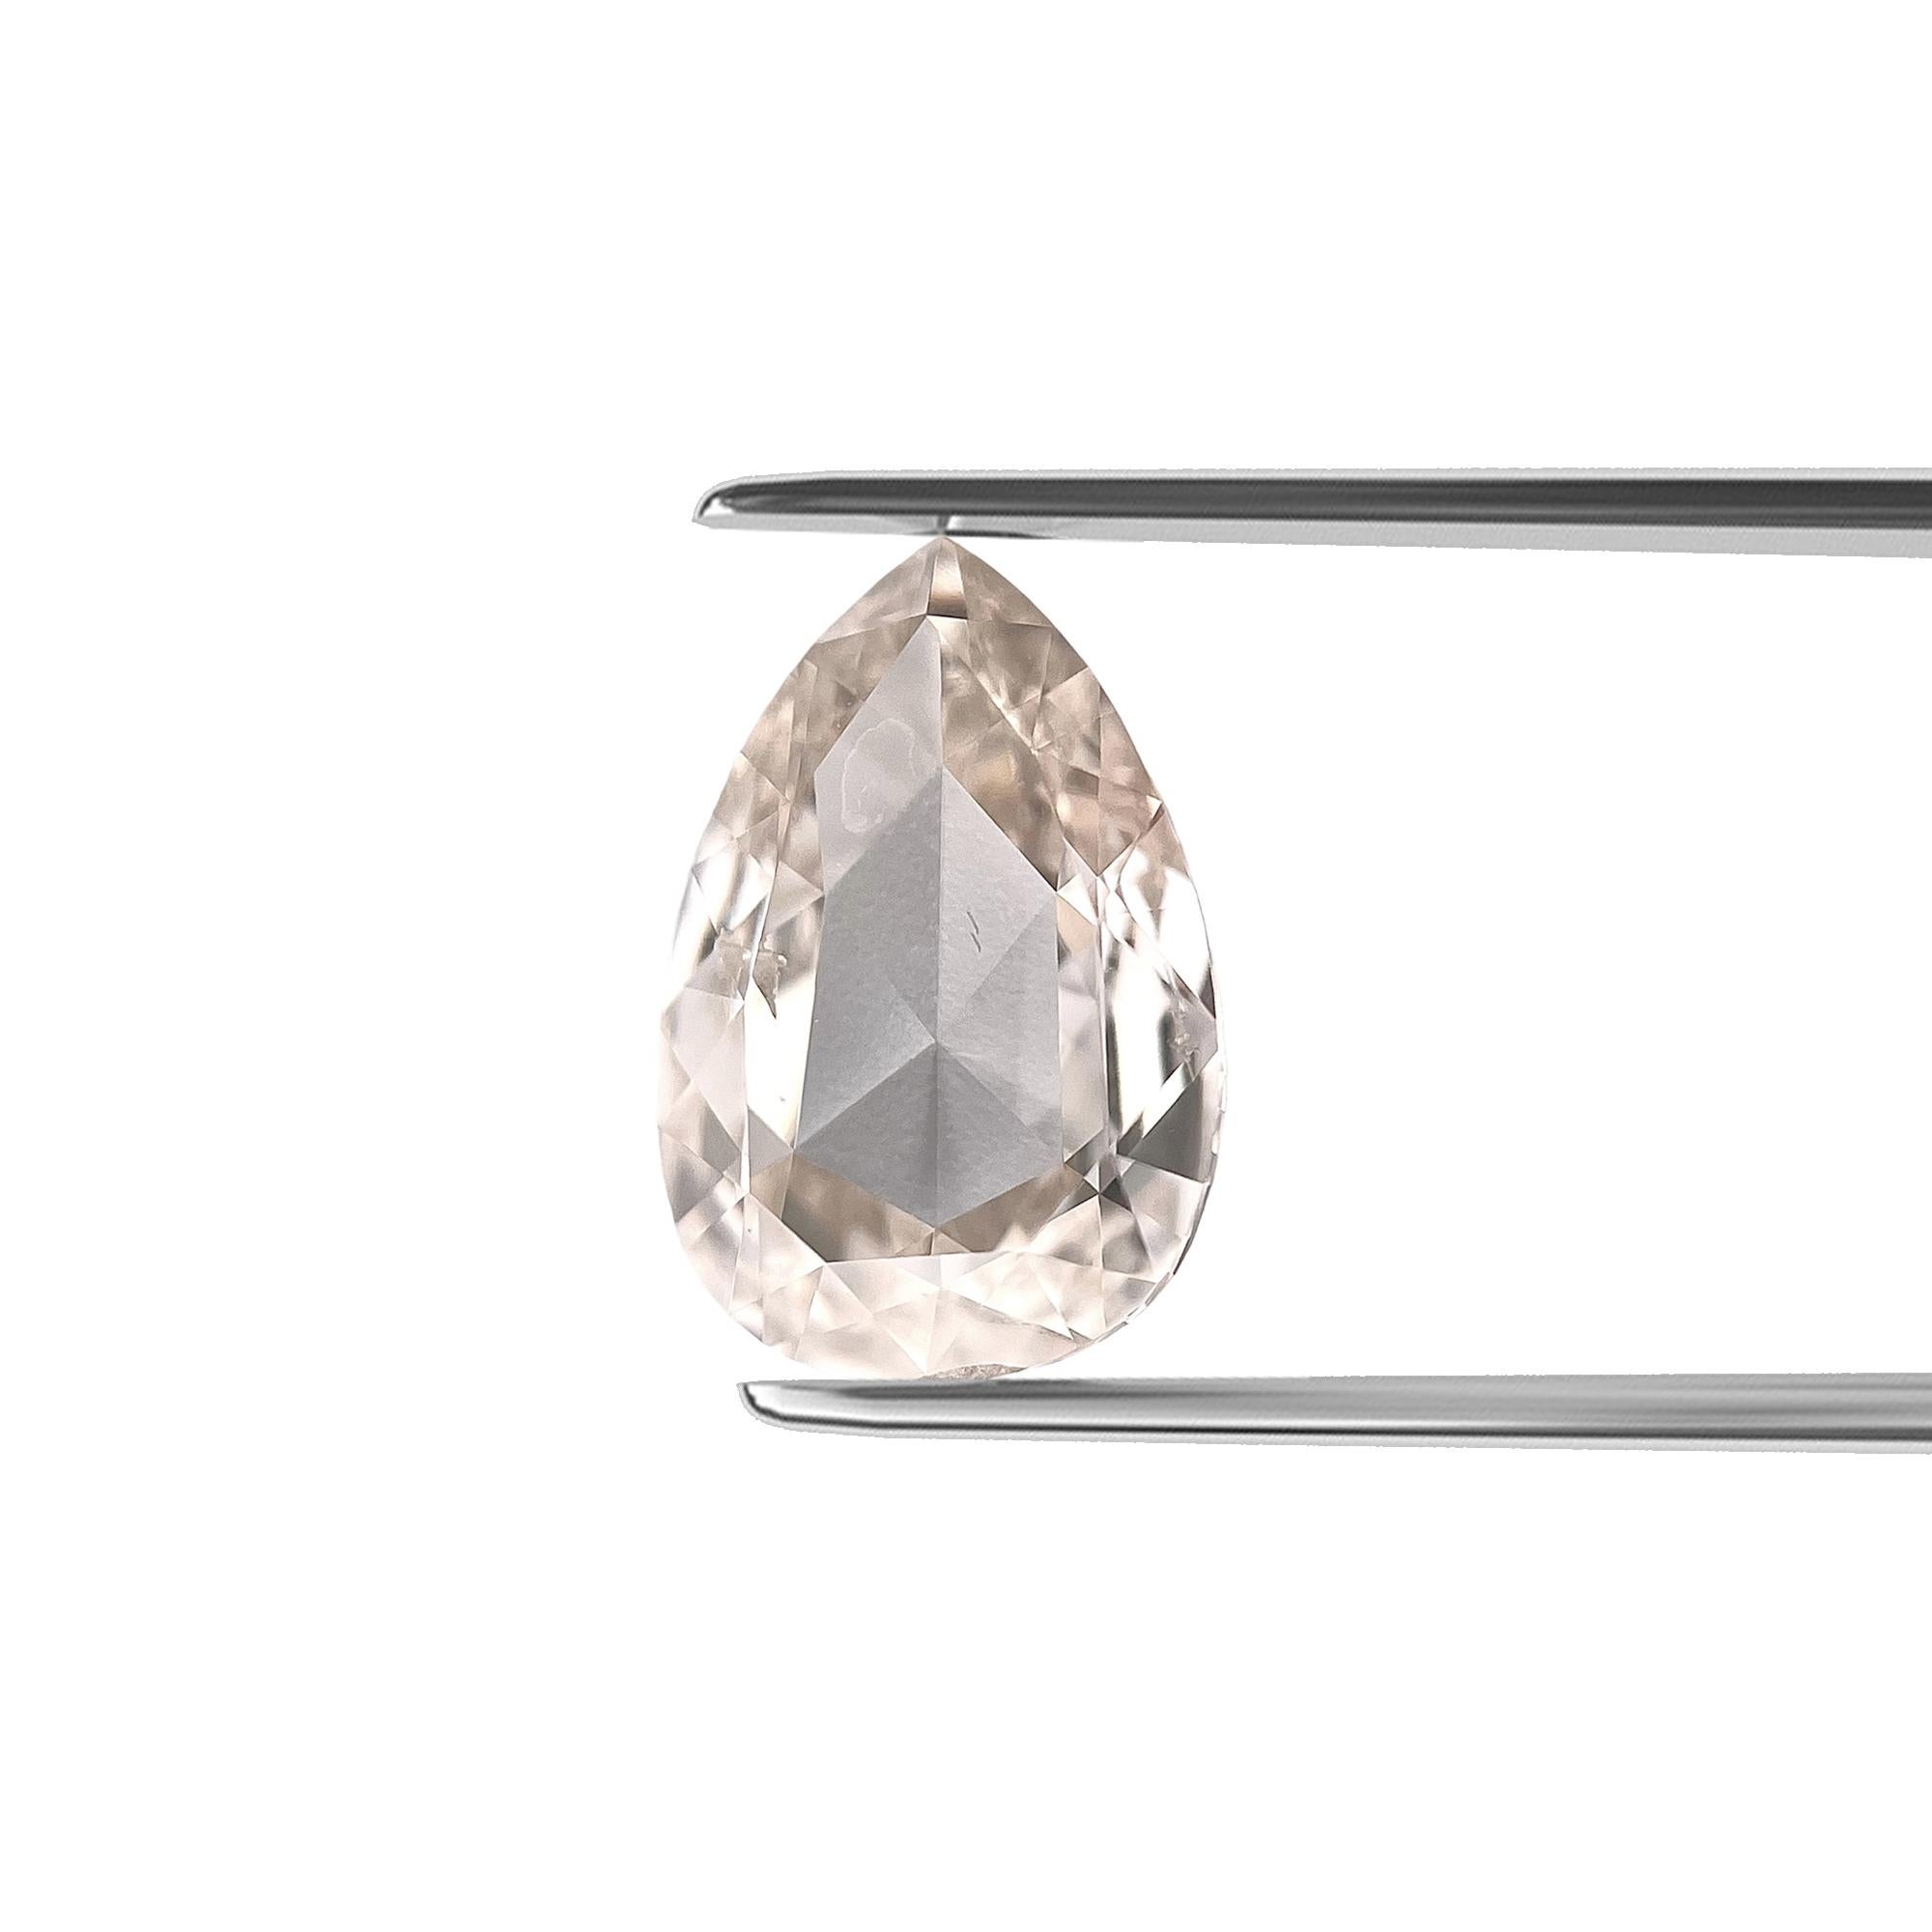 ITEM DESCRIPTION

ID #: NYC56382
Stone Shape: PEAR MODIFIED BRILLIANT
Diamond Weight: 1.00ct
Color: L, Faint Brown
Clarity: SI2
Cut:	Excellent
Measurements: 8.92 x 6.01 x 2.24 mm
Symmetry: Good
Polish: Very Good
Fluorescence: None
Certifying Lab: